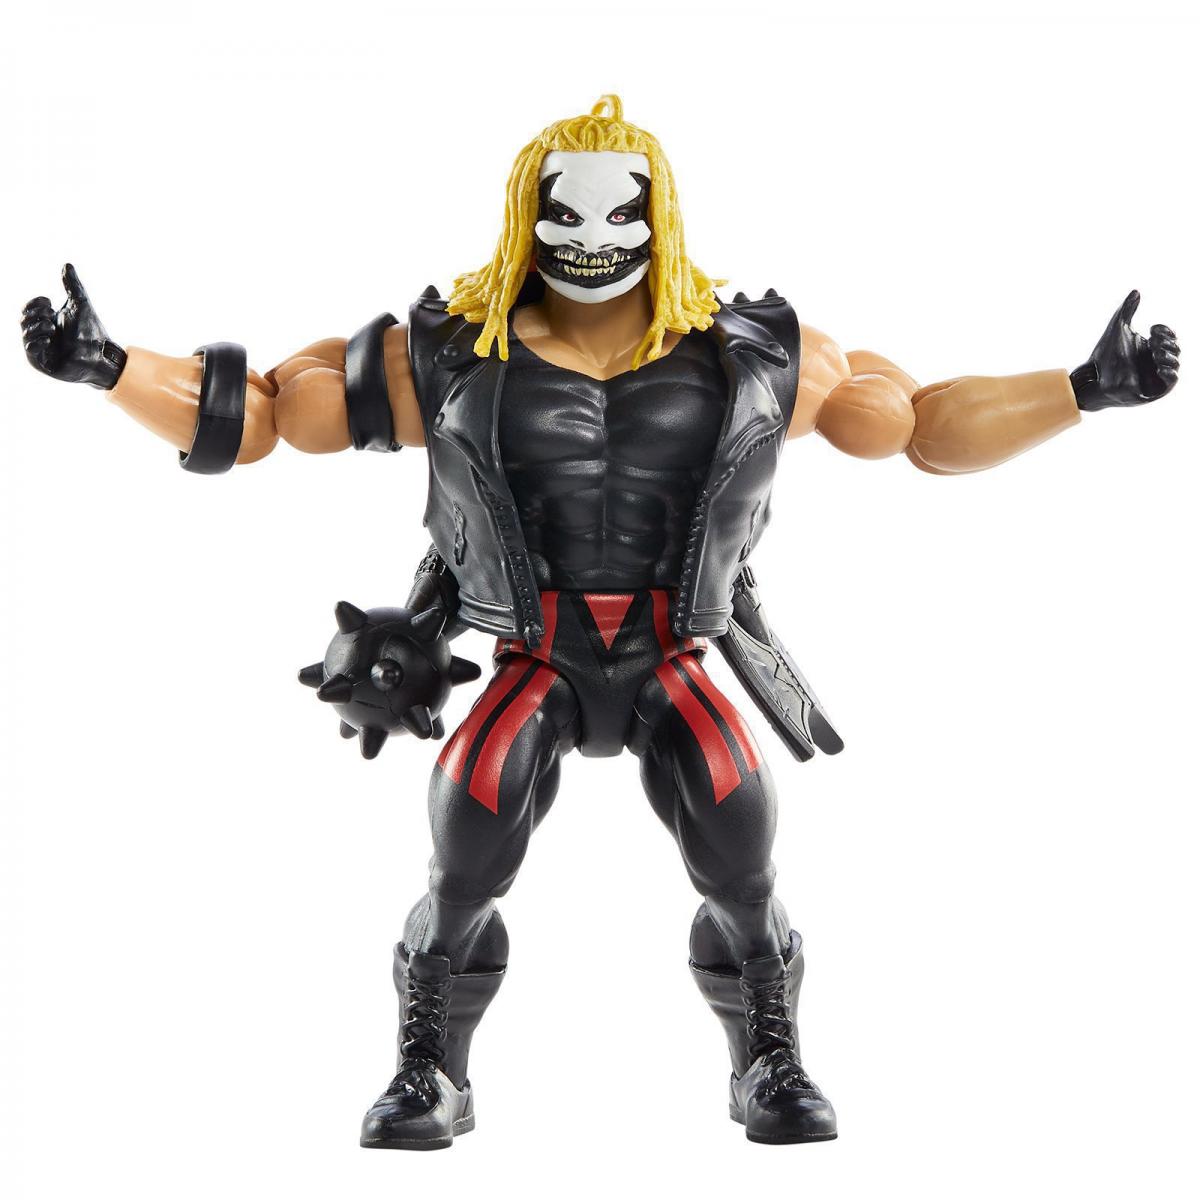 2020 Mattel Masters of the WWE Universe Series 4 "The Fiend" Bray Wyatt [Exclusive]